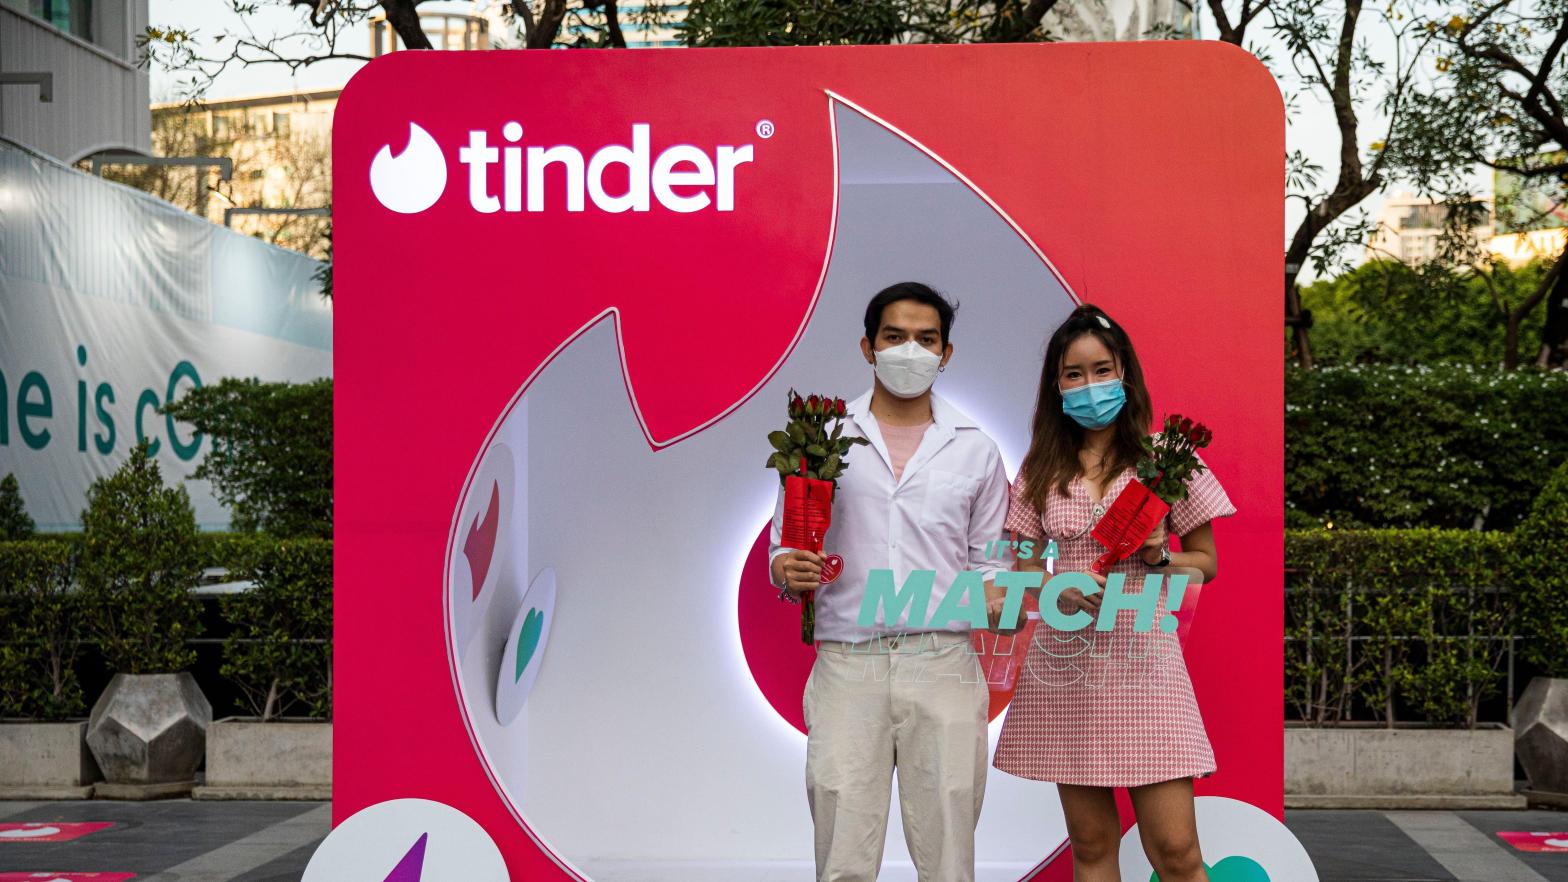 Tinder has struggled to move away from its identity as a hook-up app as parent company Match Group talked up 'premium subscription features.' (Photo: Lauren DeCicca, Getty Images)